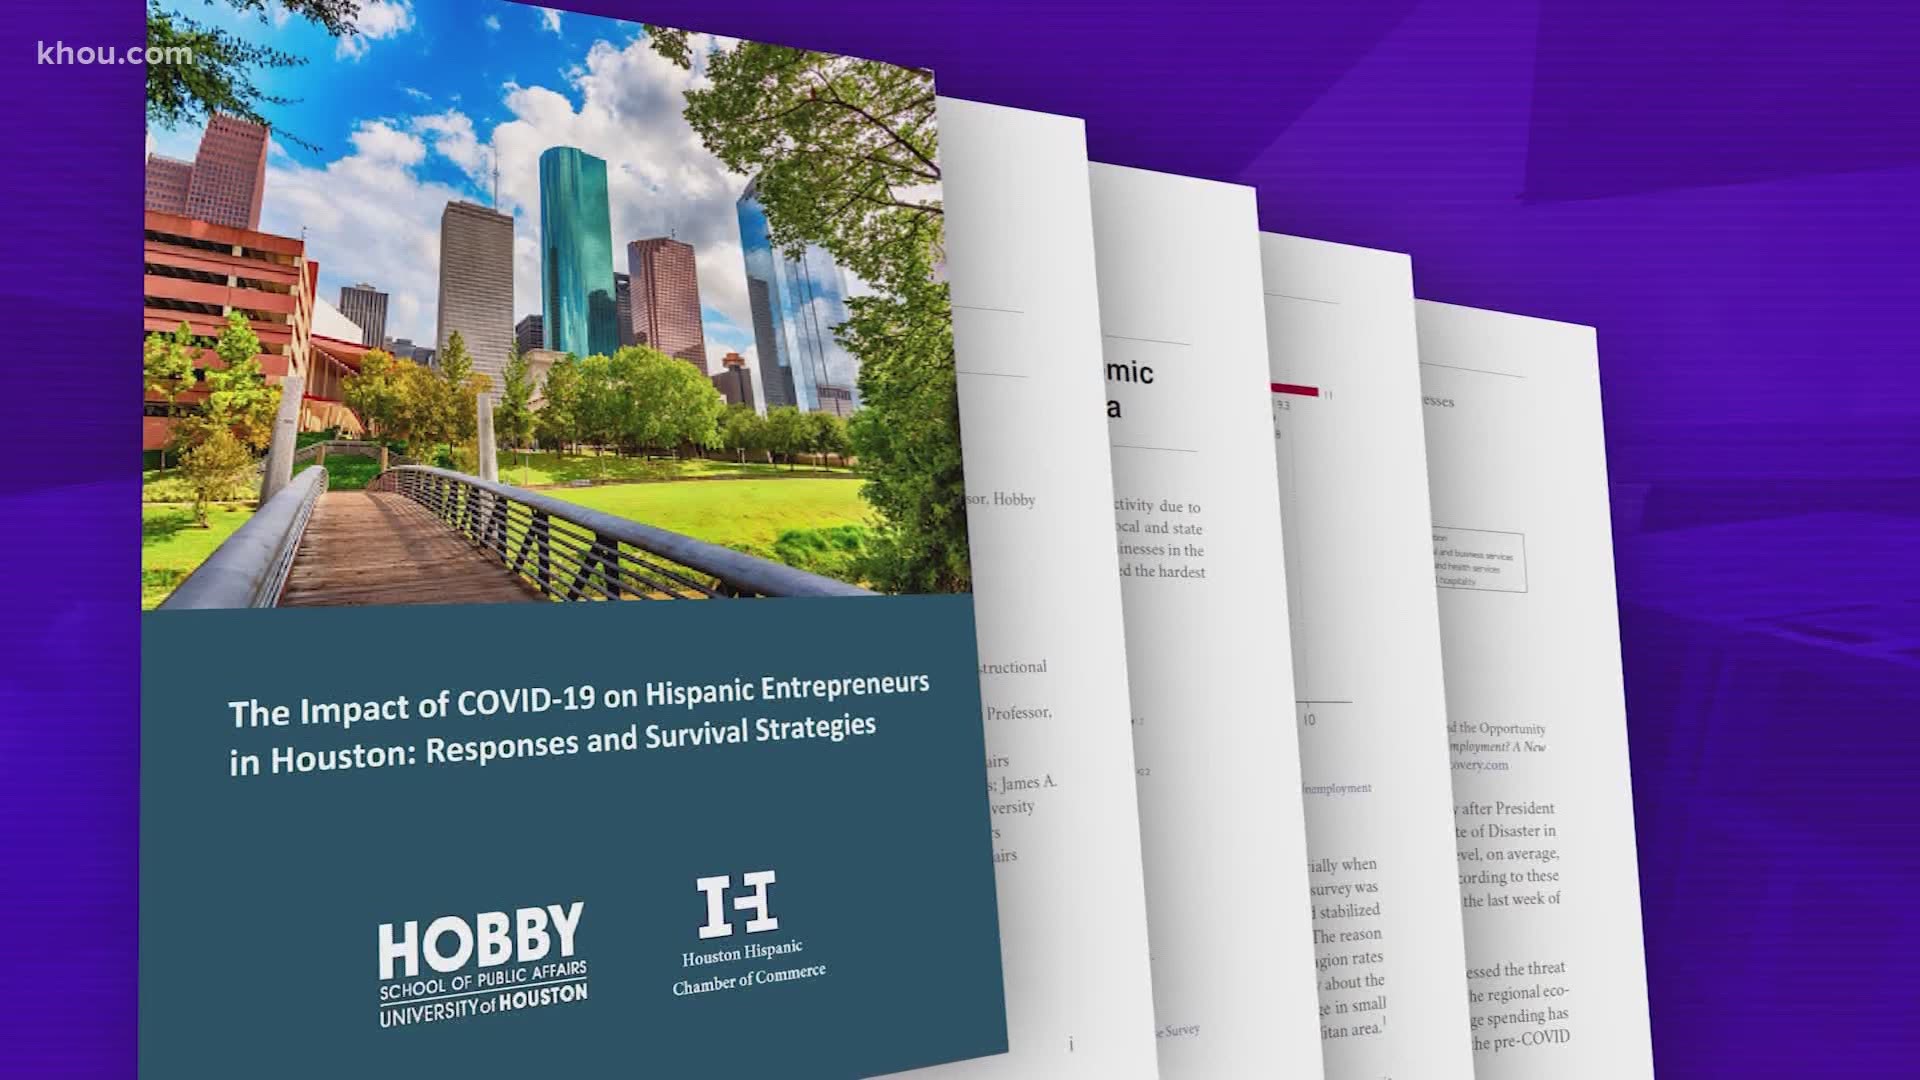 The University of Houston conducted a survey to see how Hispanic businesses are affected by COVID-19. 1/3 said they have furloughed/laid off at least 80% of workers.